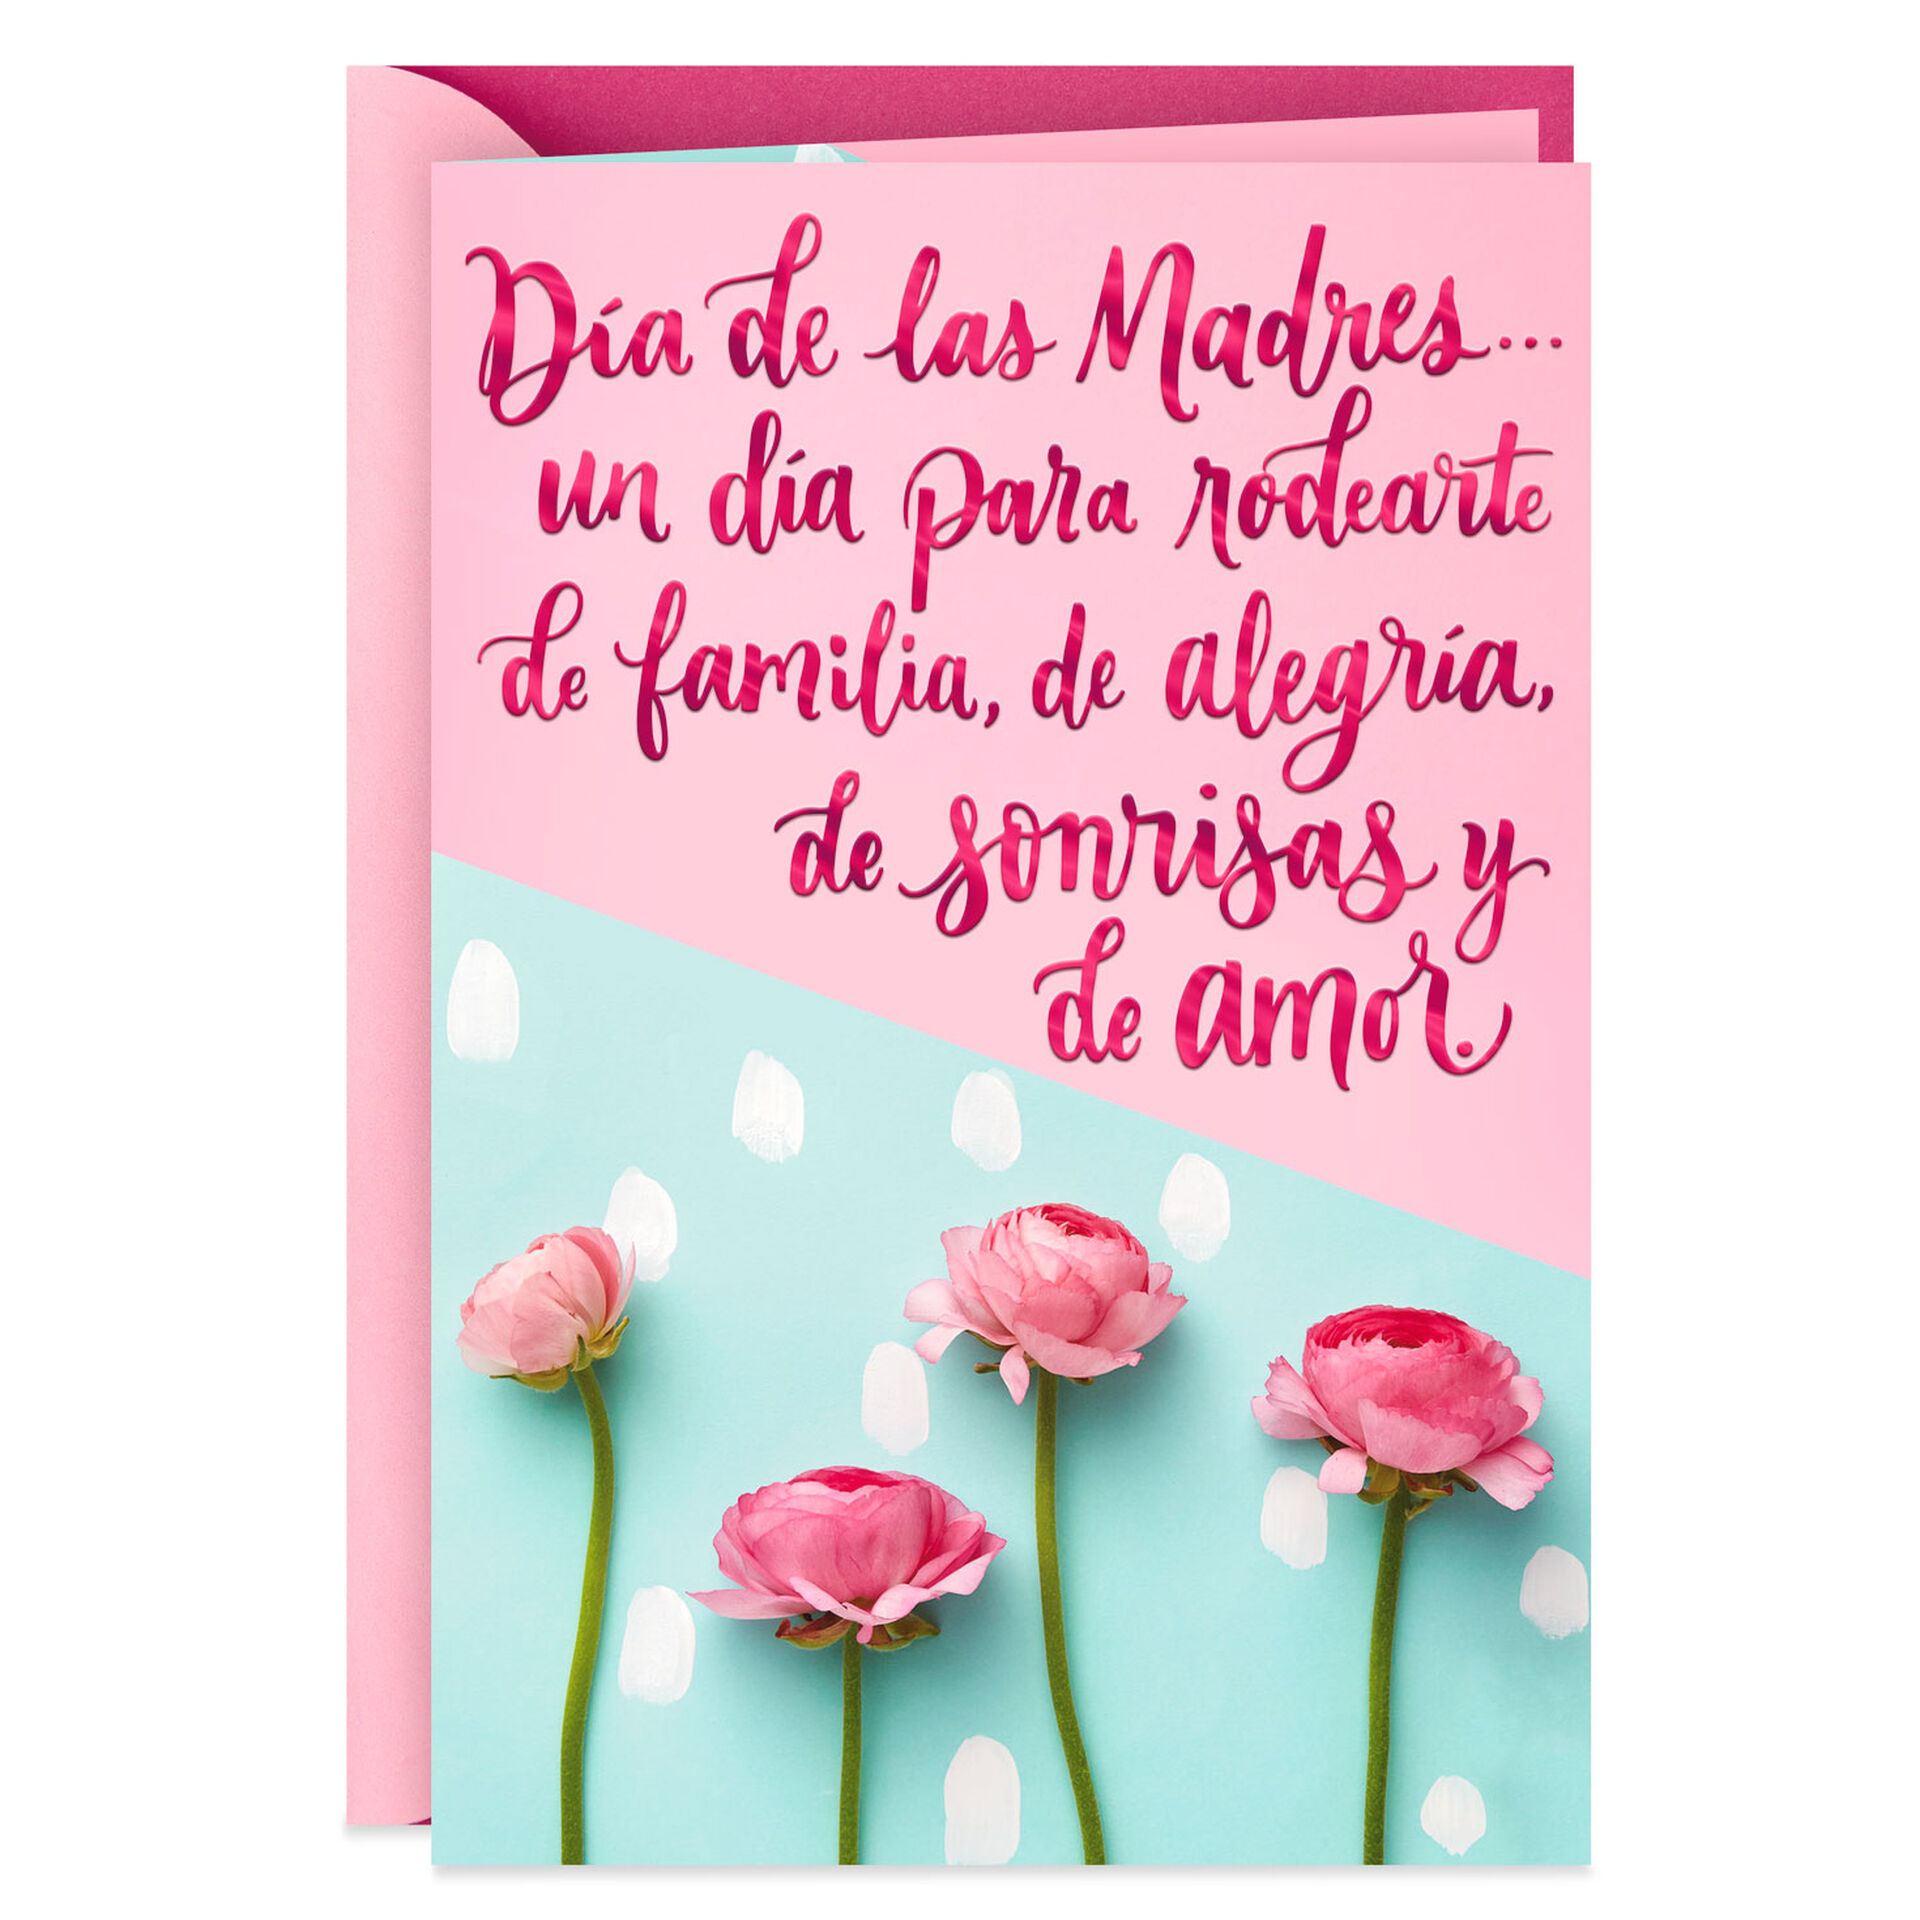 a-day-to-feel-loved-spanish-language-mother-s-day-card-greeting-cards